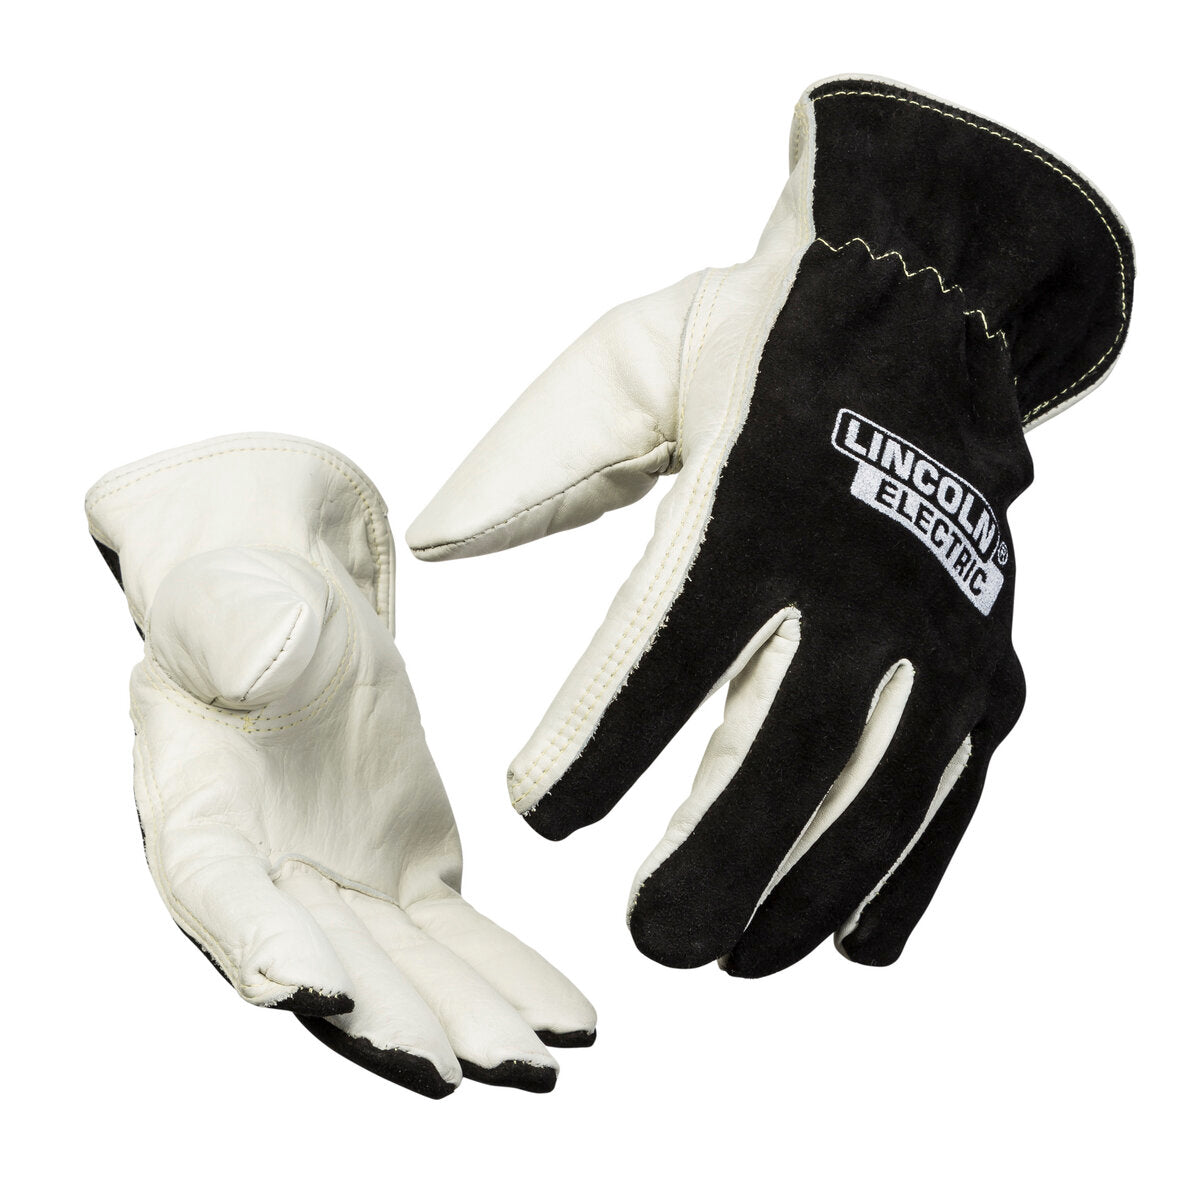 Lincoln Electric - Welders Leather Drivers Gloves - Medium - K3770-M